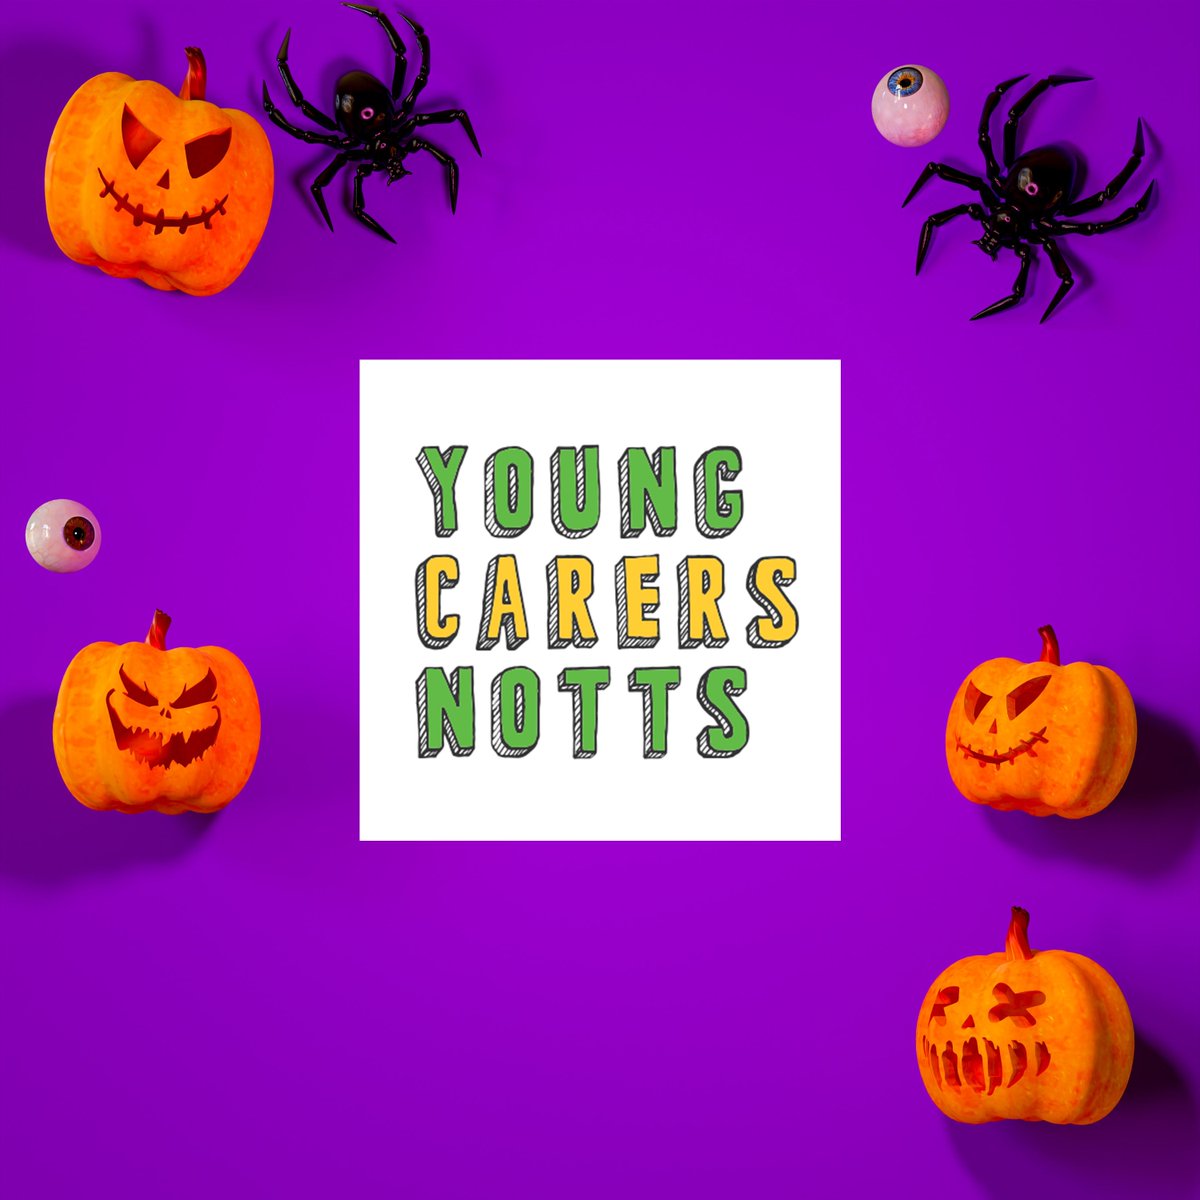 We have loads of fun activities and events for young carers going on over half term and beyond! Check out our calendar on the new Young Carers Notts website: youngcarersnotts.co.uk/activities